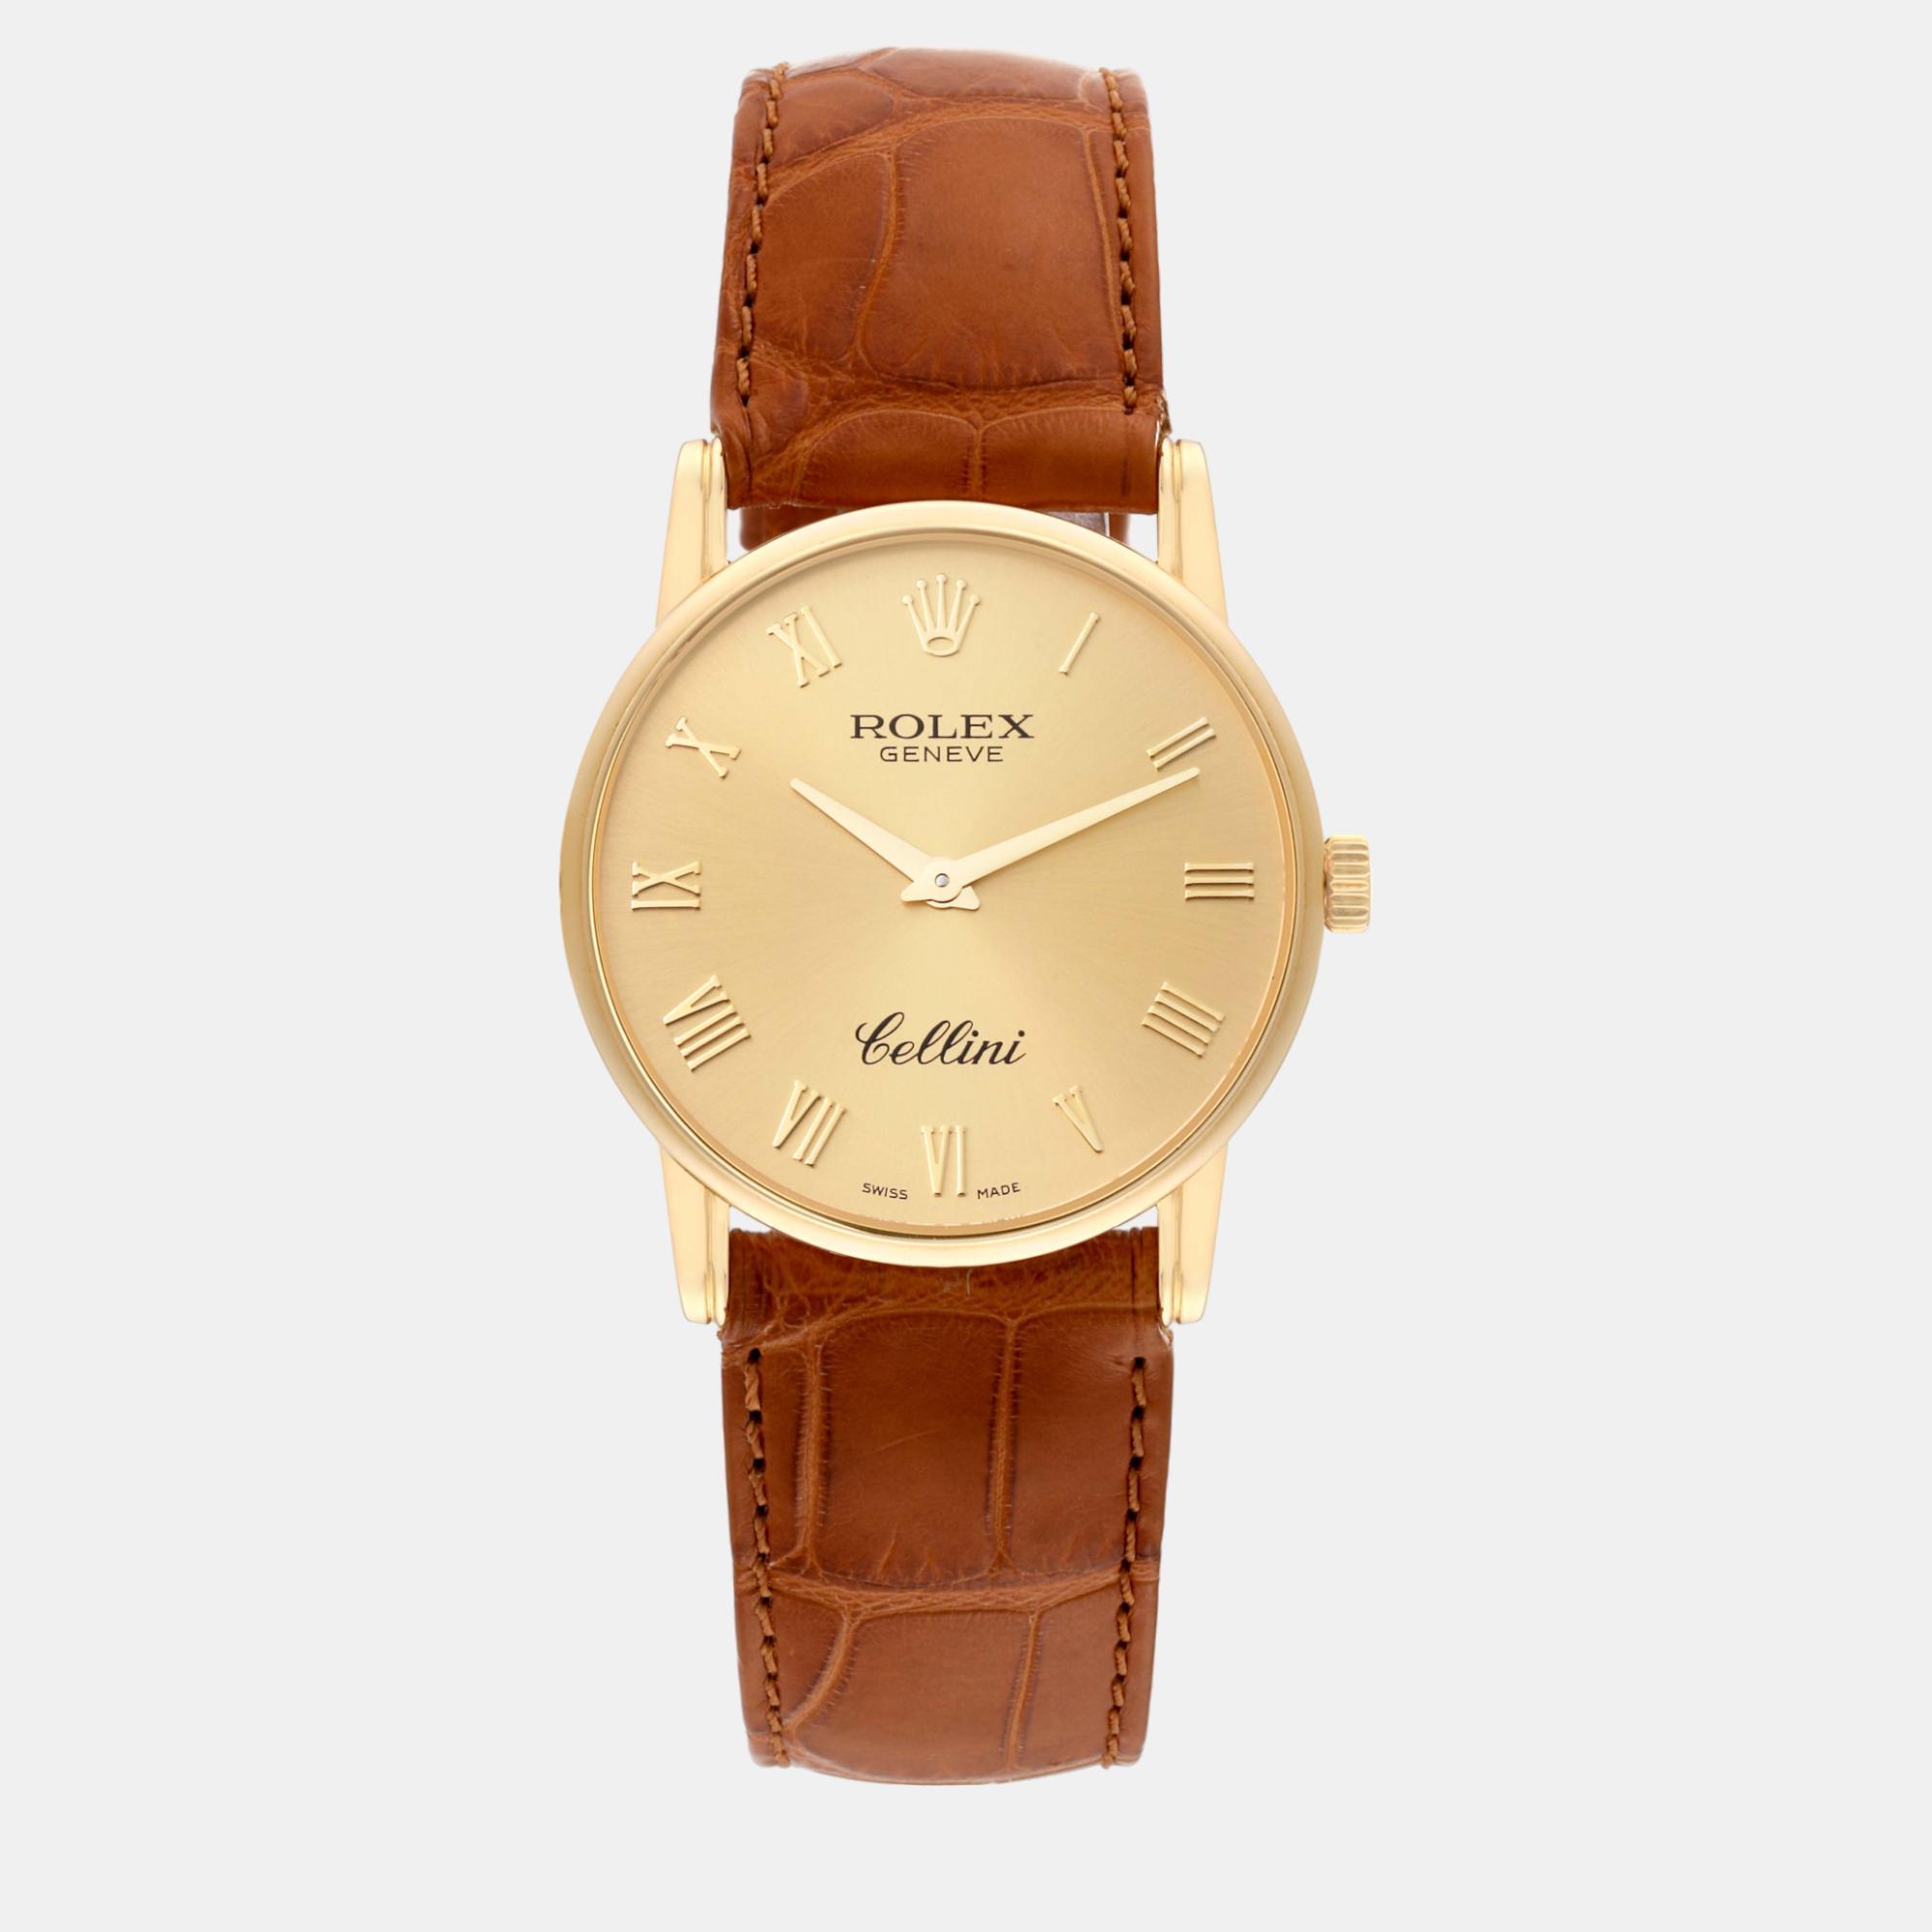 Rolex cellini classic yellow gold champagne dial mens watch 5116 31.8 mm x 5.5 mm